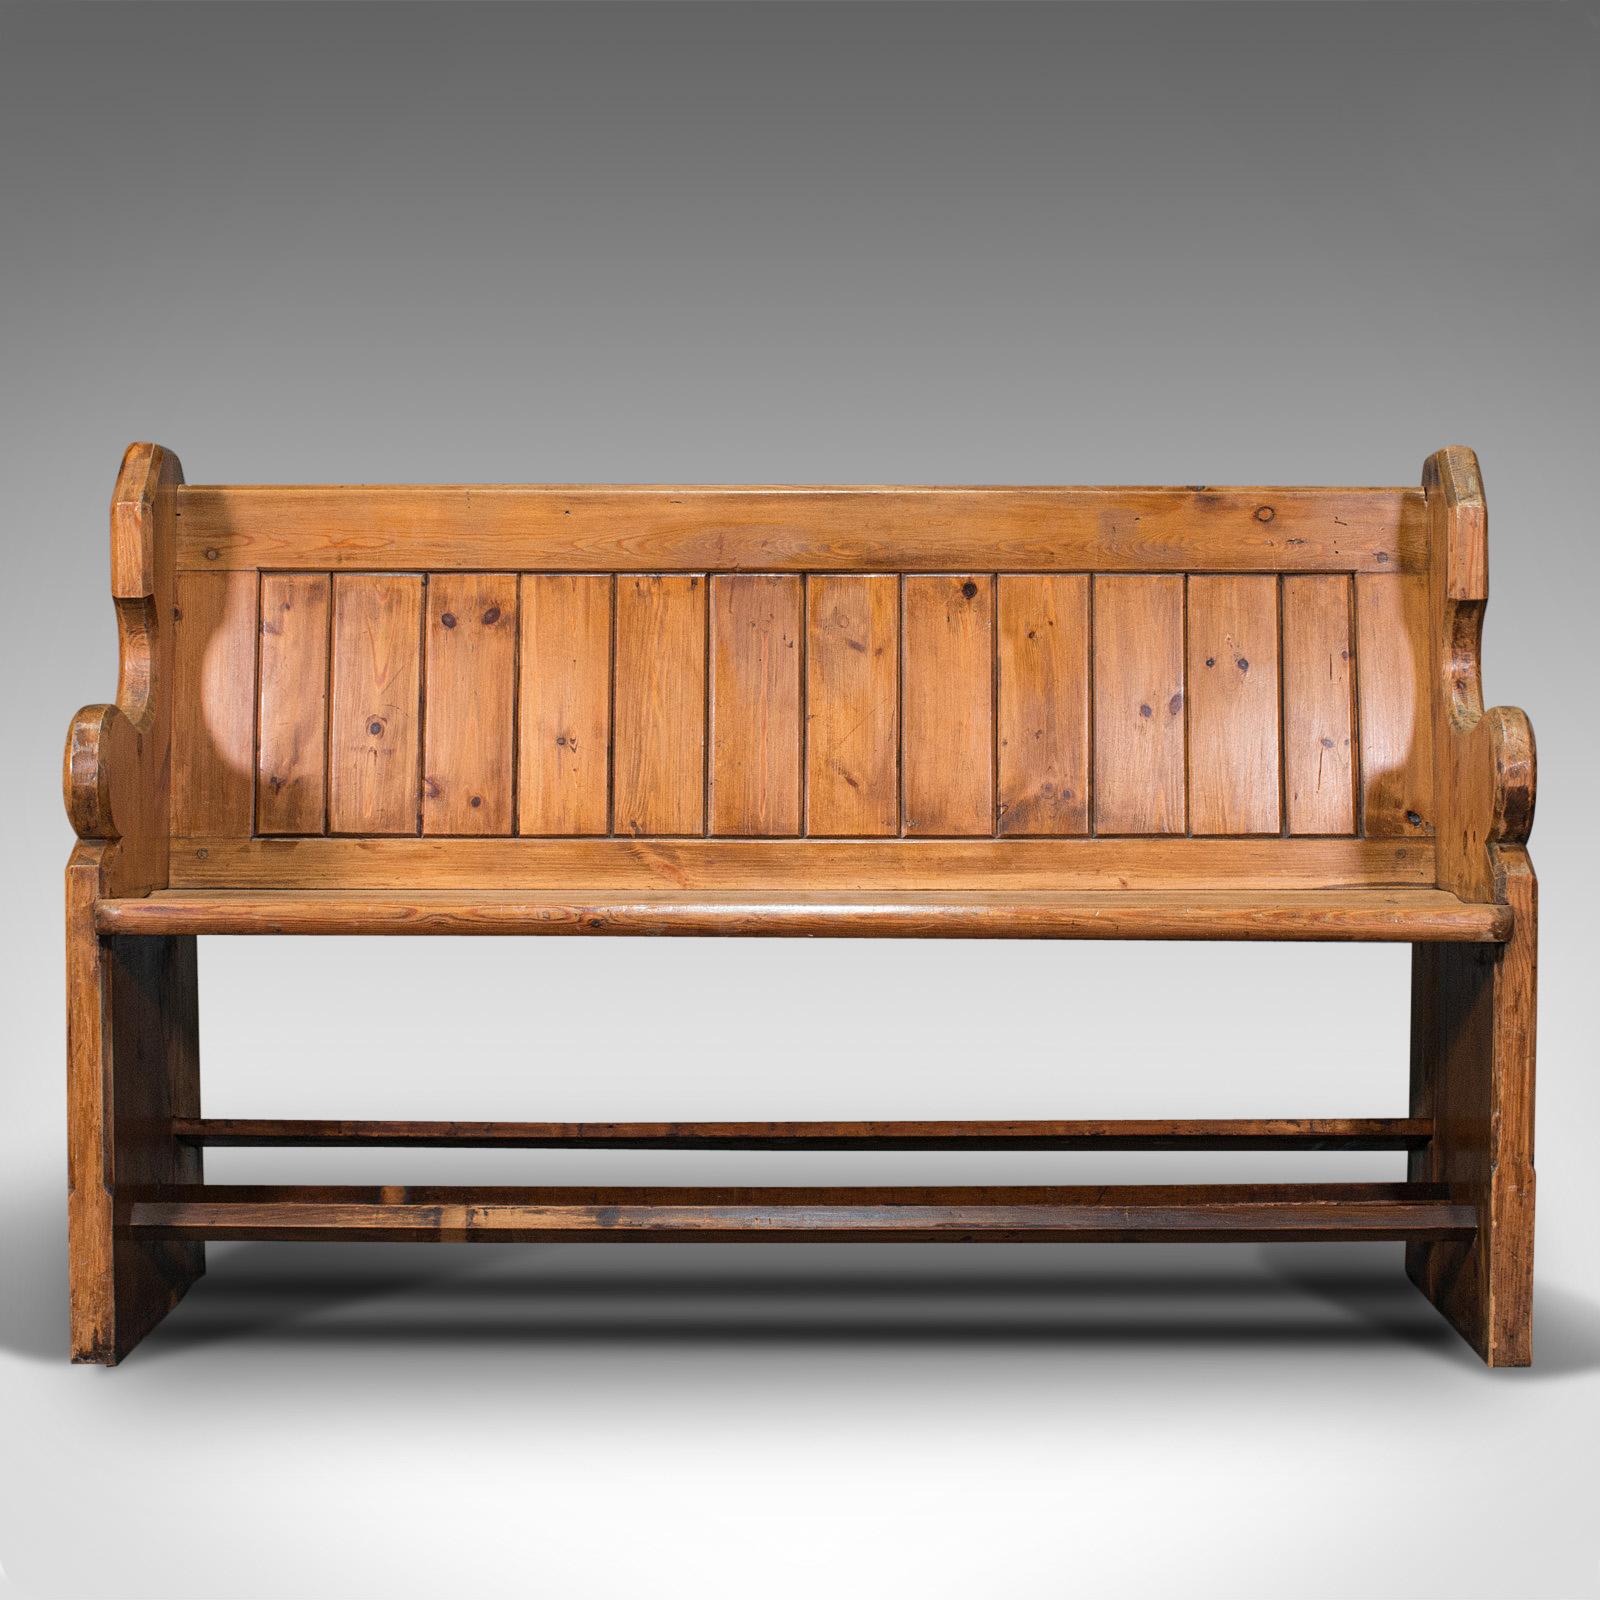 This is an antique bench seat. An English, pine three-seat pew with ecclesiastic taste, dating to the Victorian period, circa 1900.

Relax upon this generously accommodating bench for three
Displays a desirable aged patina throughout
Victorian